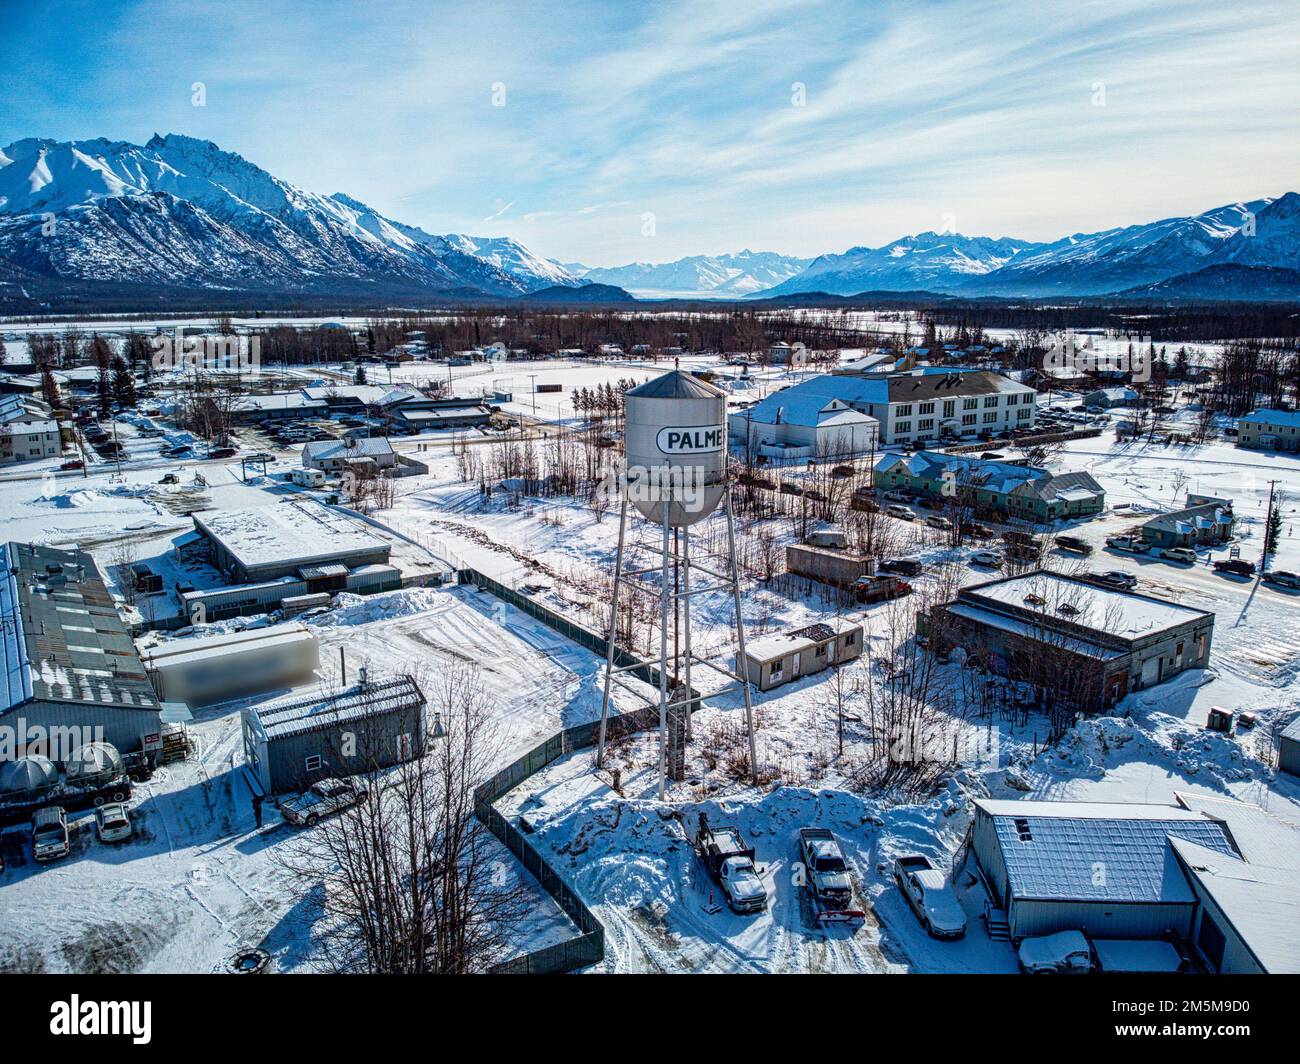 An aerial winter view of the city of Palmer covered in snow and surrounded by rocky mountains Stock Photo